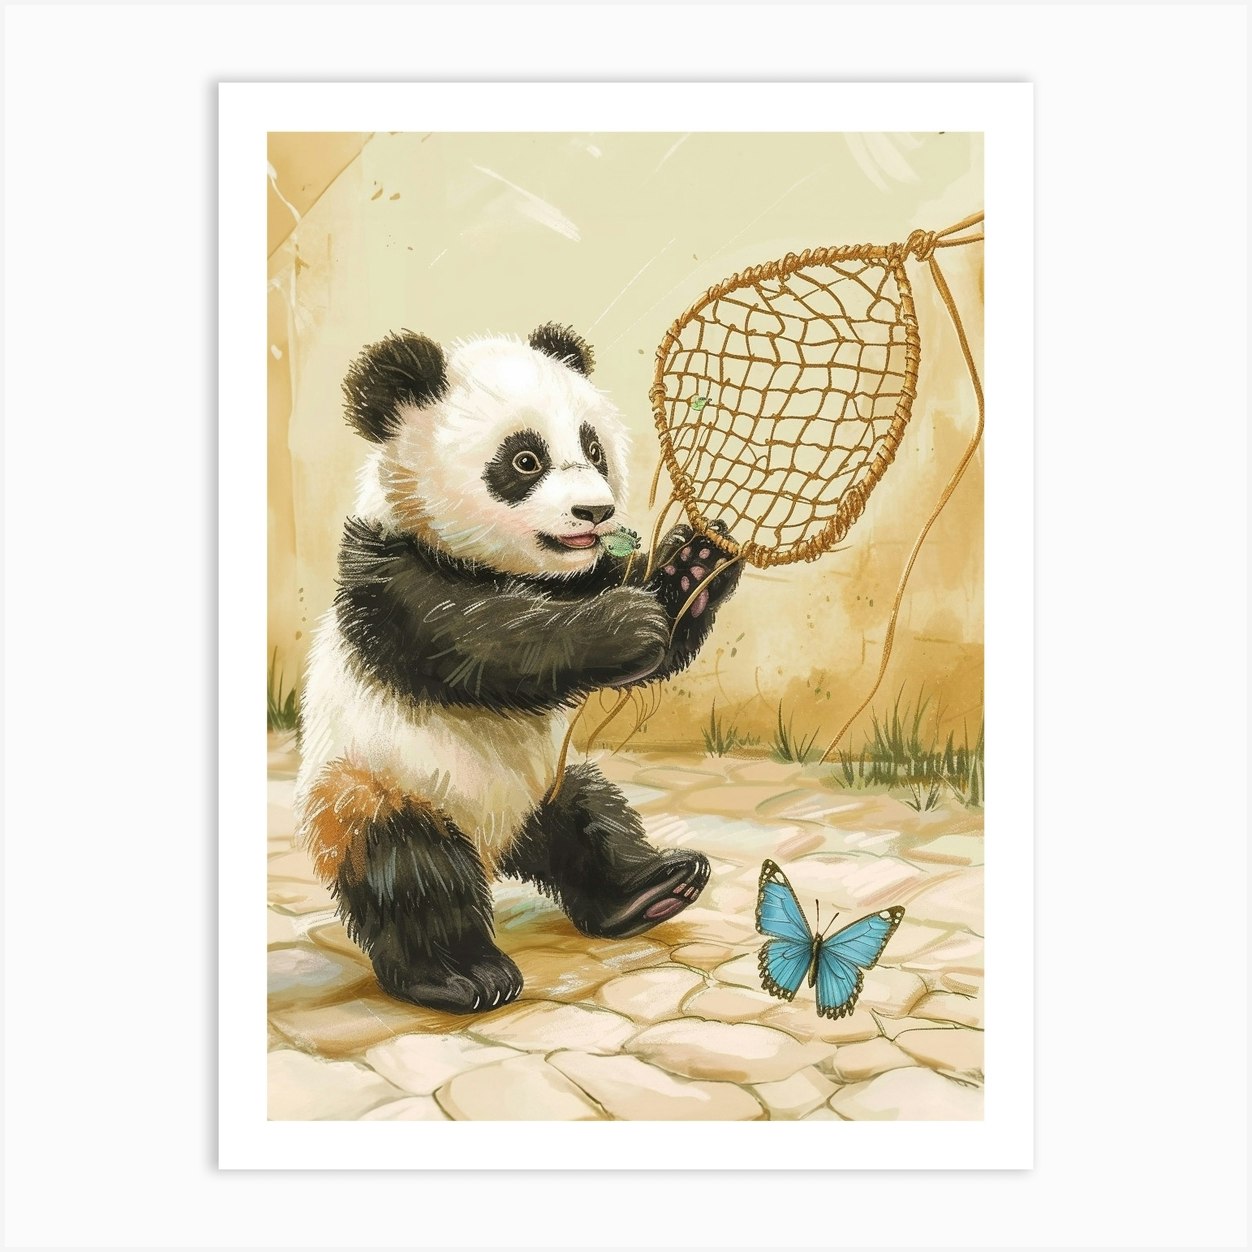 Giant Panda Cub Playing With A Butterfly Net Storybook Illustration 1 Art  Print by BearBrush Studios - Fy